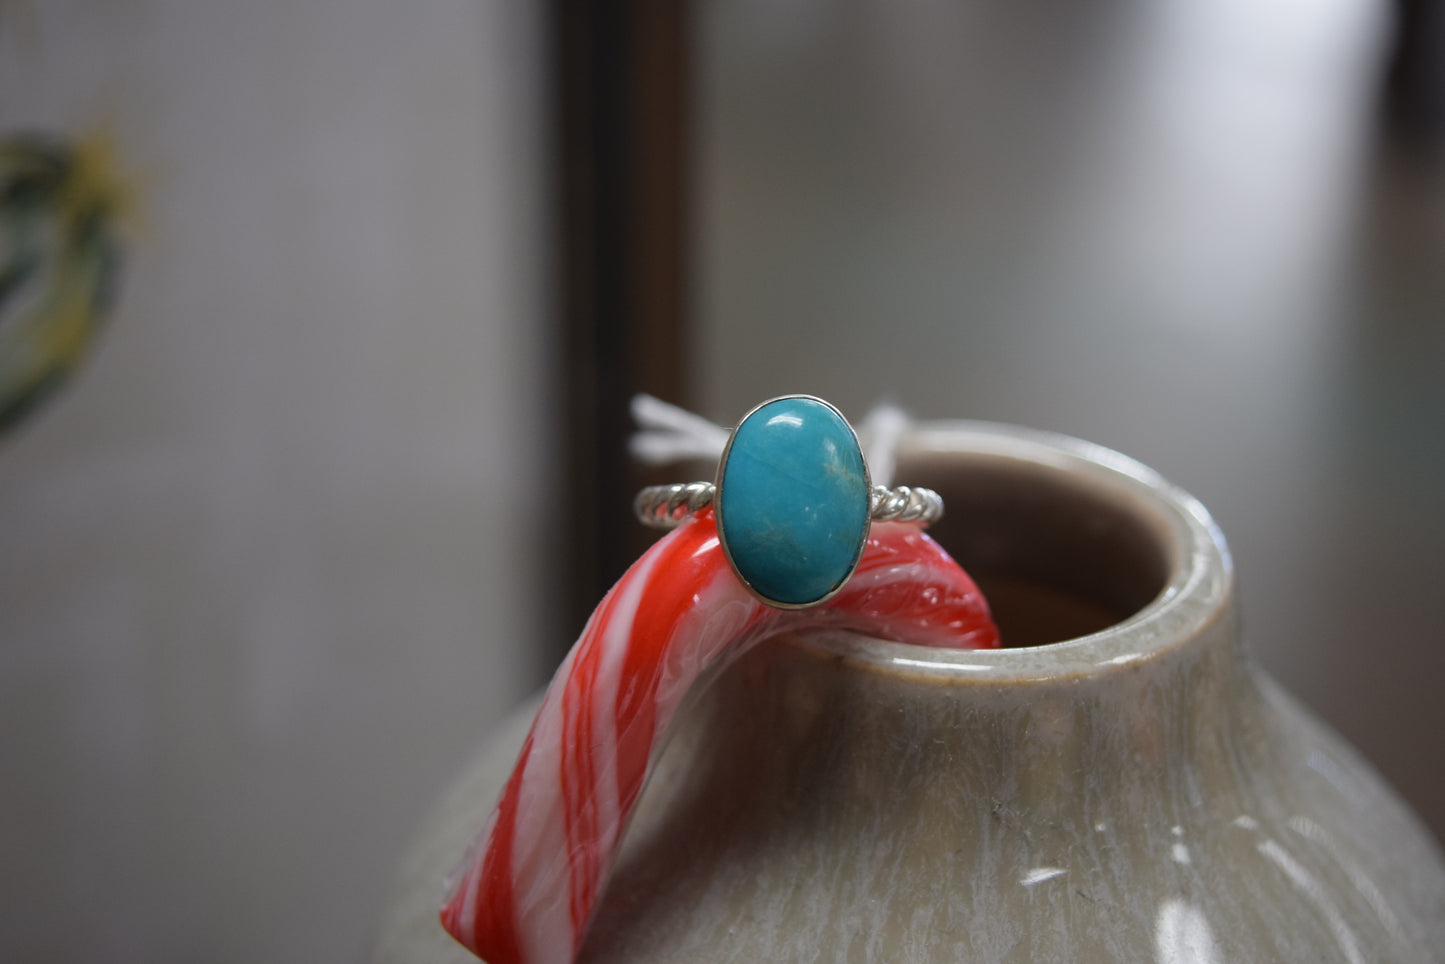 The Tally Teal Stoned Ring